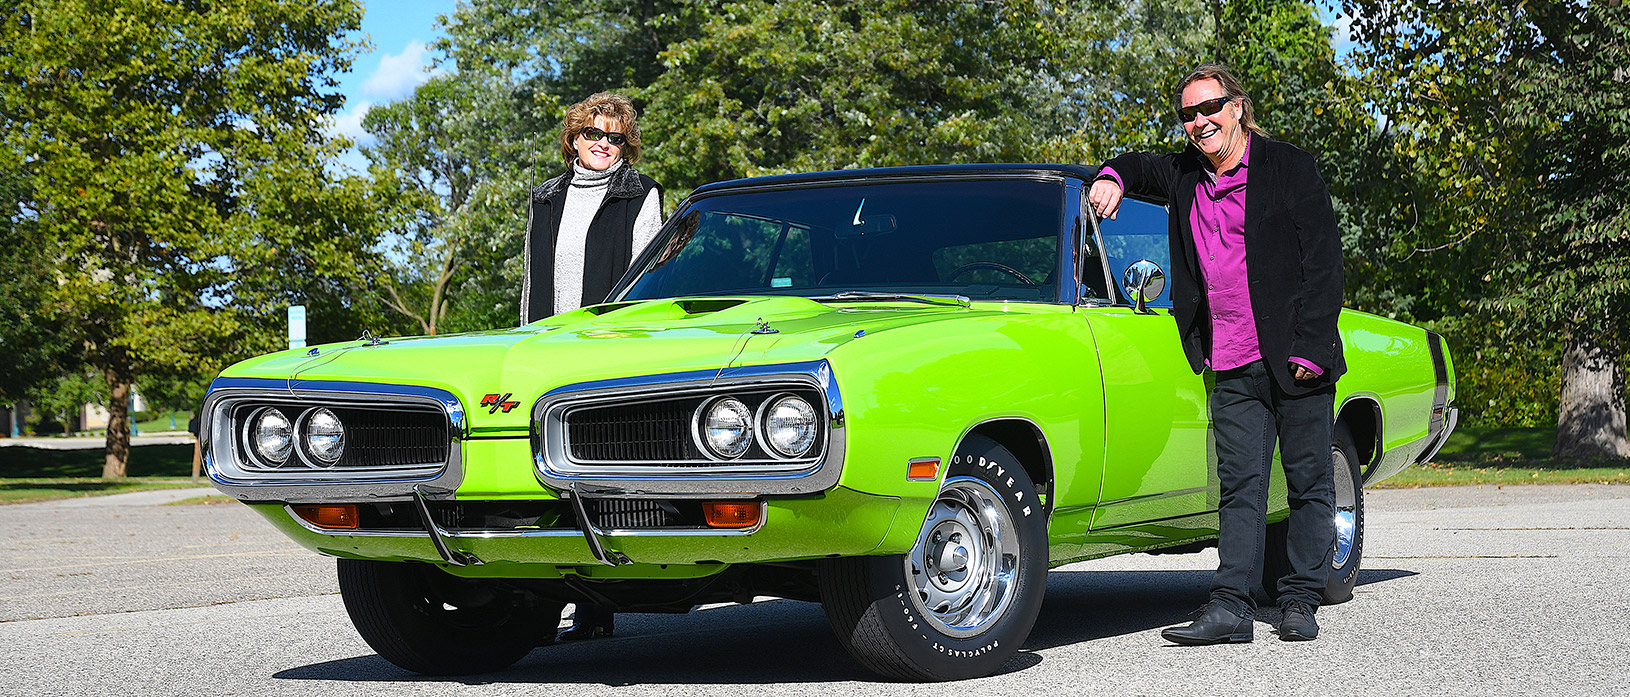 Mark Young and his wife standing beside their green 1070 Coronet R/T convertible